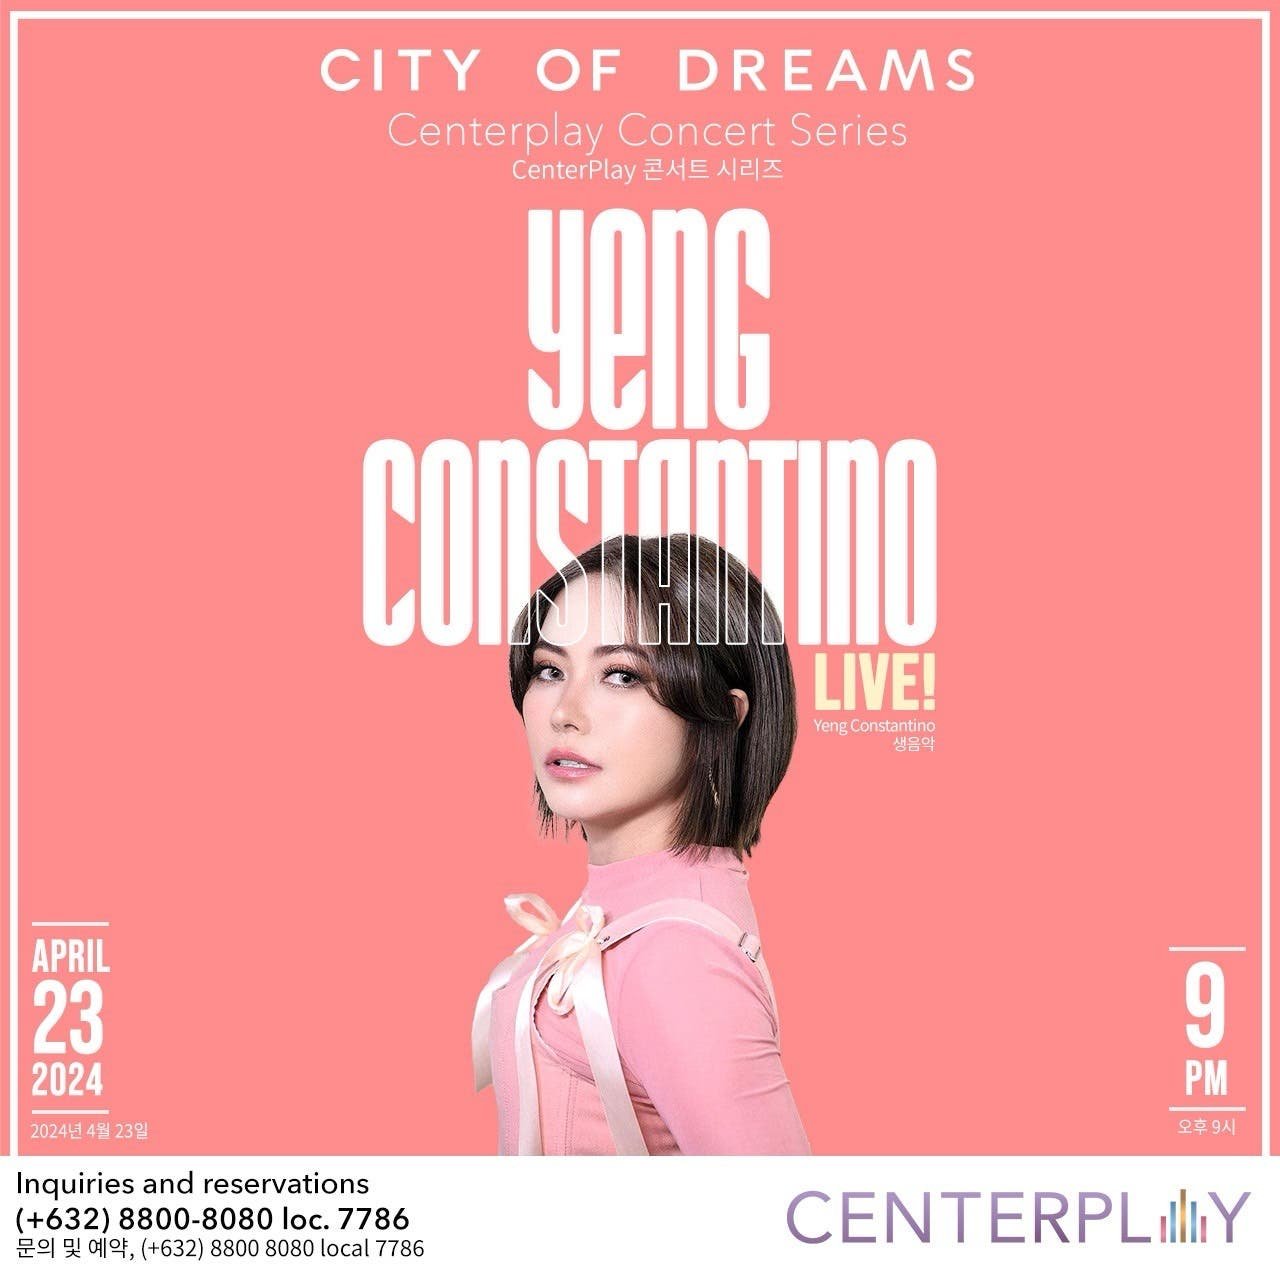 Yeng Constantino Holds Concert at City of Dreams Manila this April